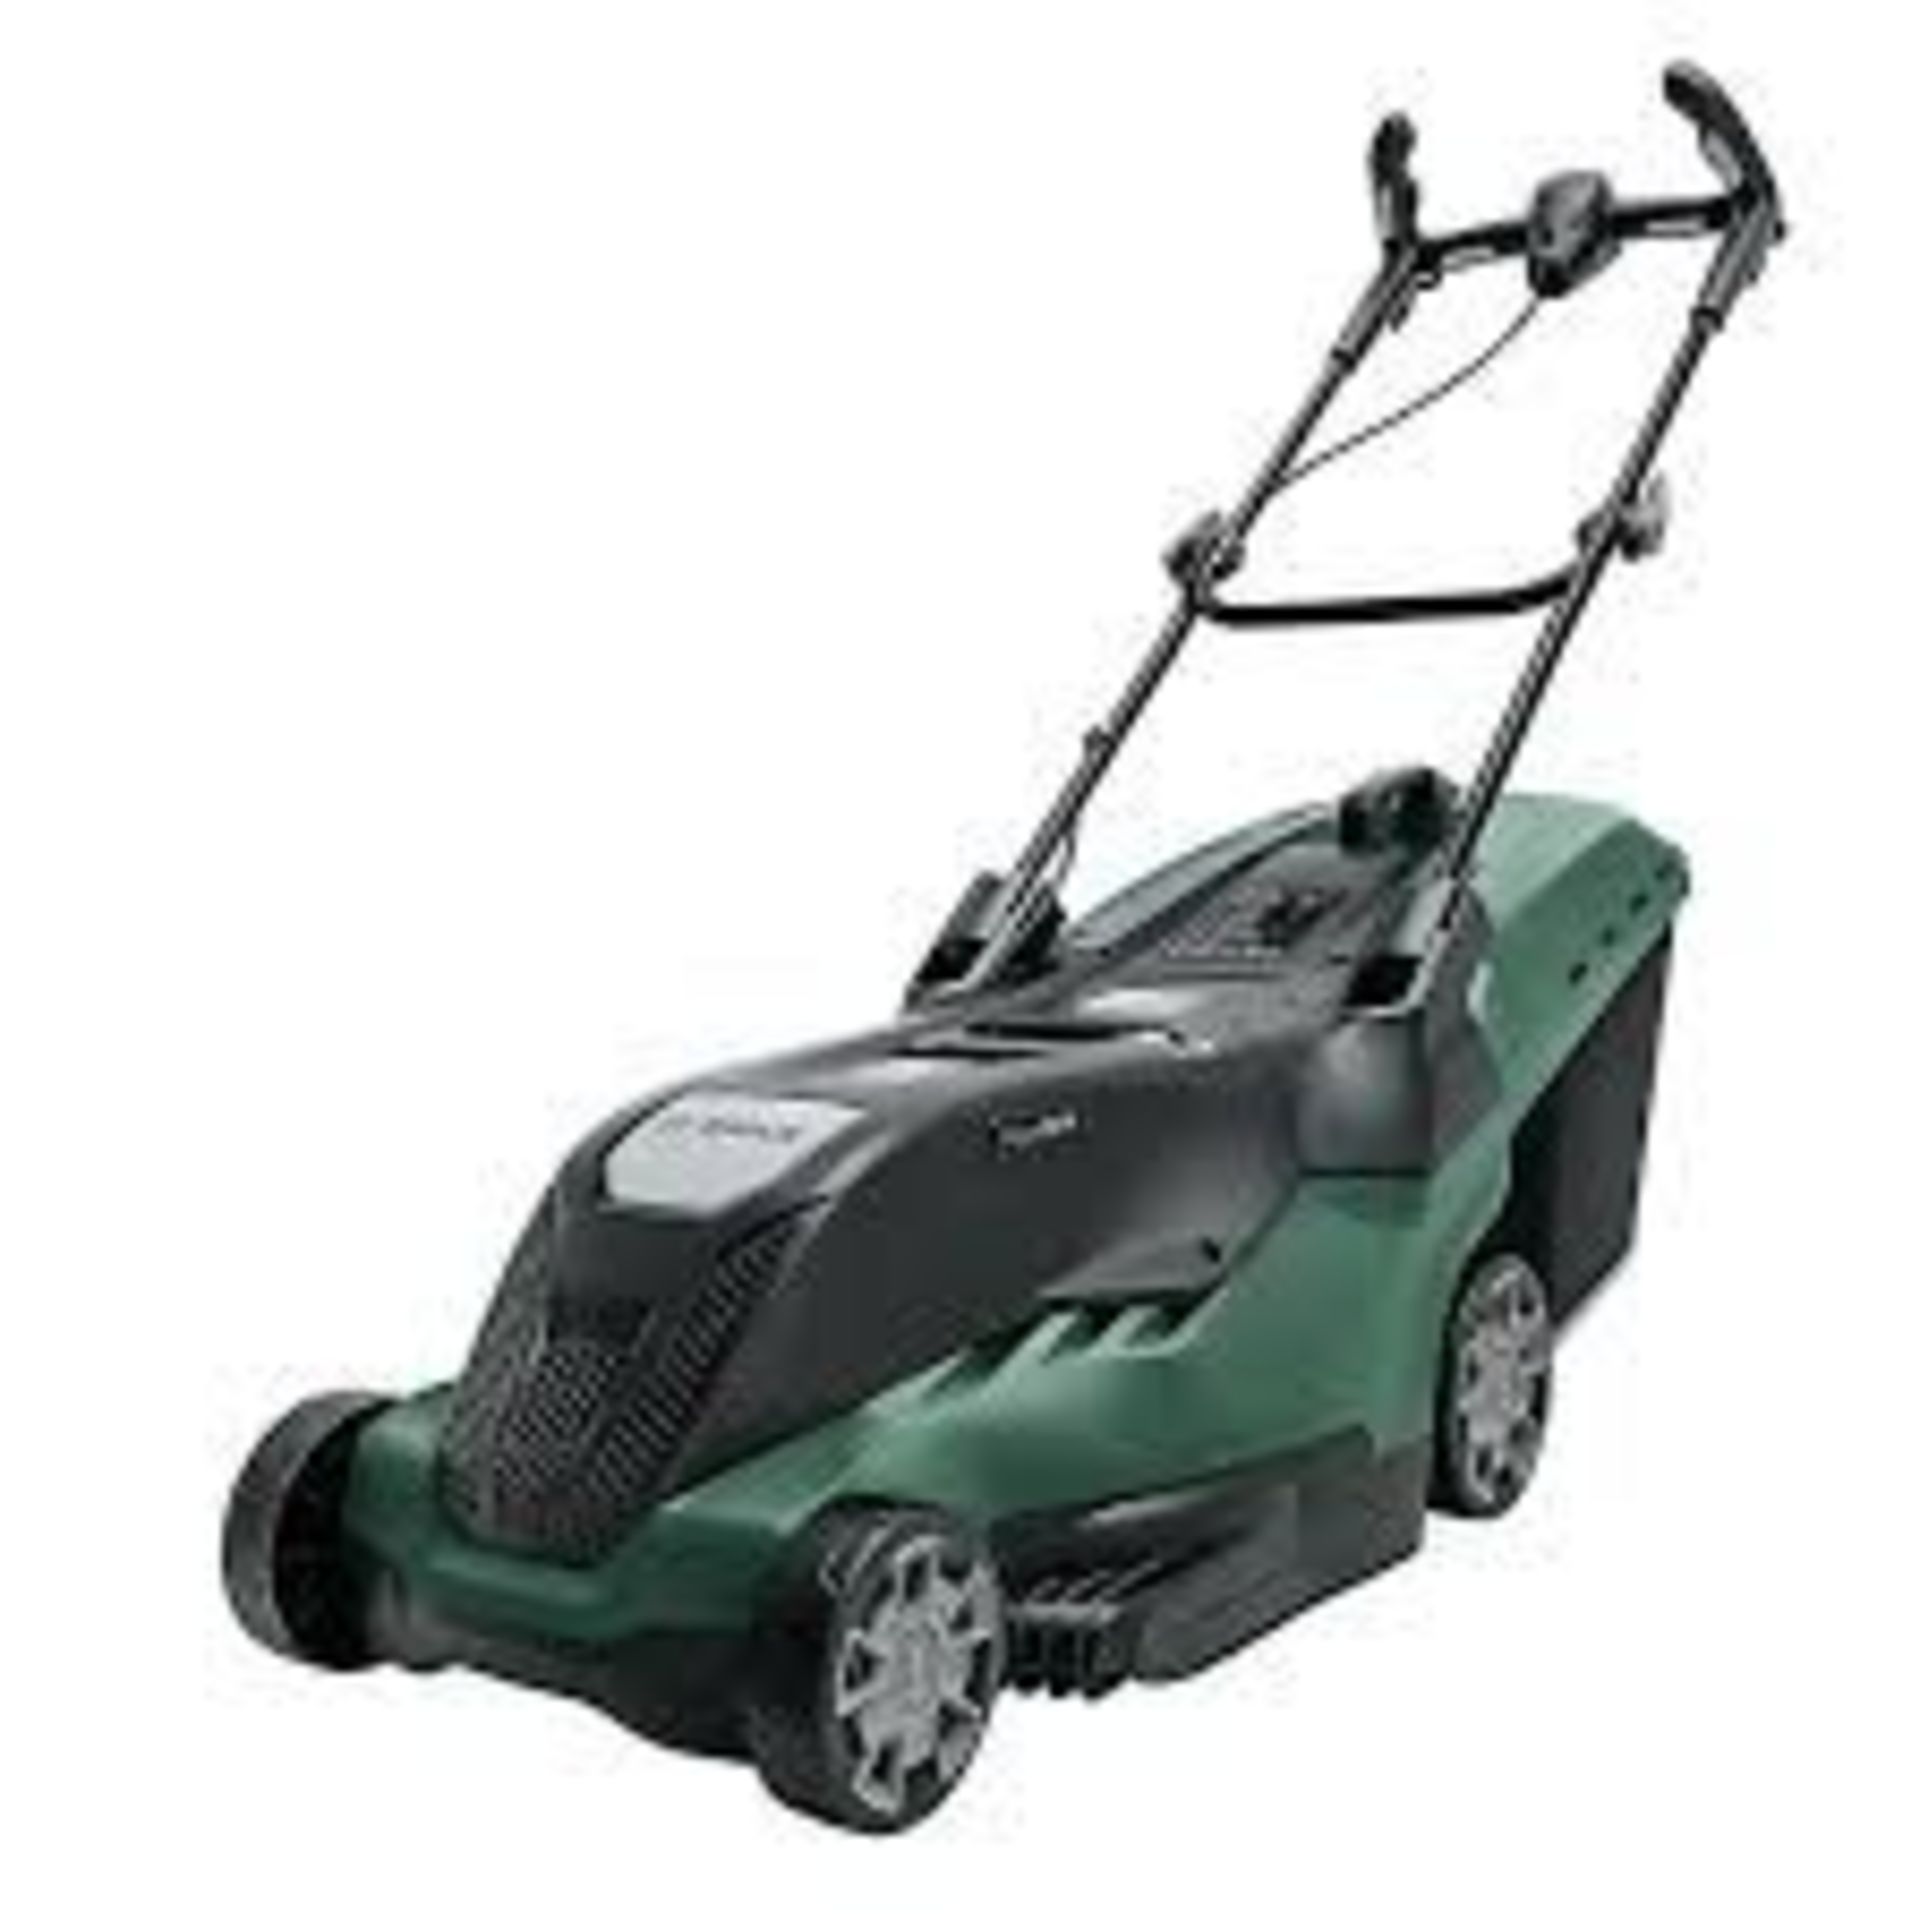 Bosch Rotak Universal 650 Corded Rotary Lawnmower. - R14.11. With cutting and collection in one